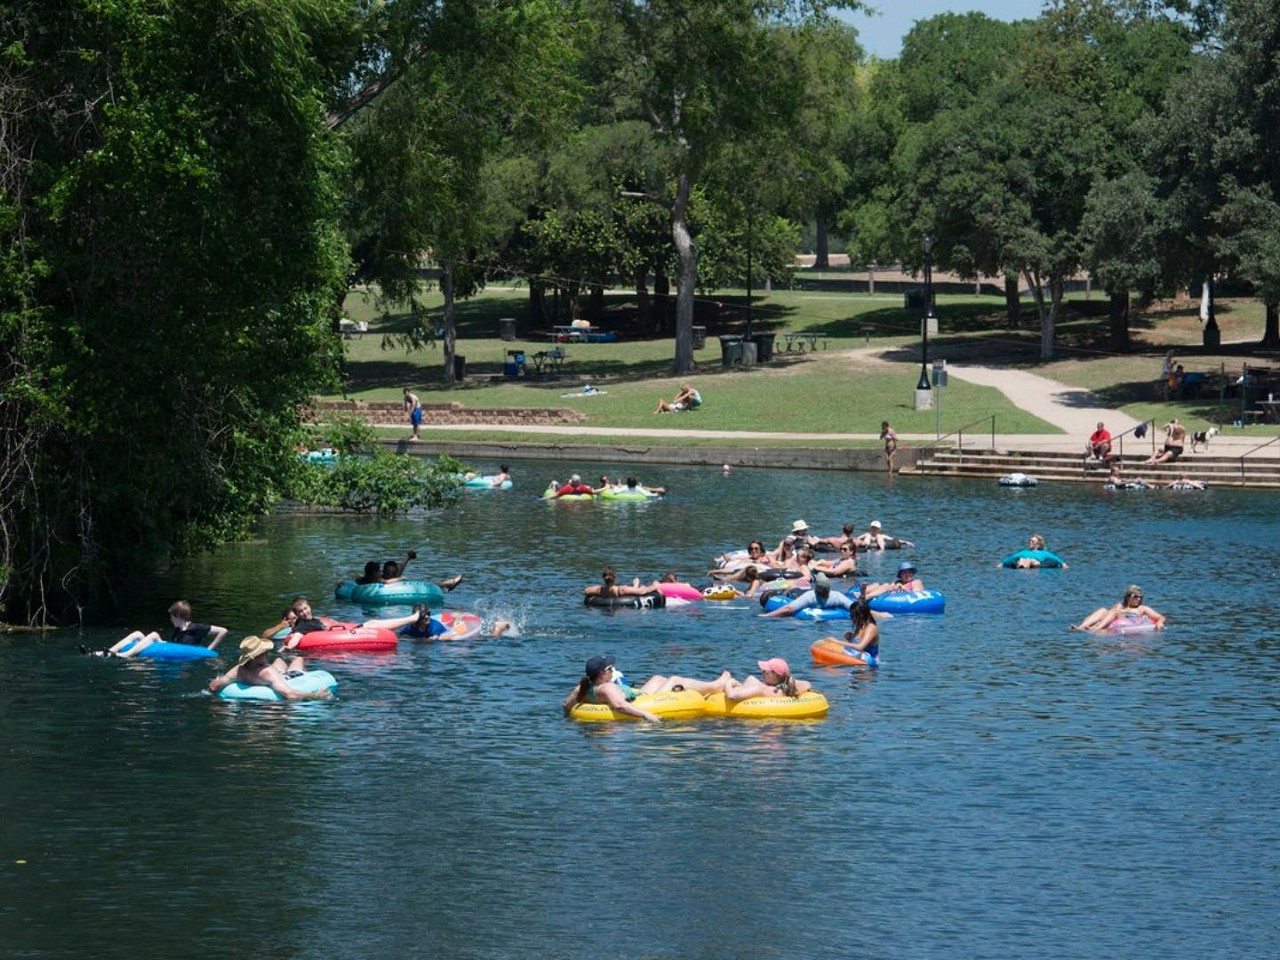 Comal River
164 Landa Park Drive, New Braunfels, (830) 387-4408, playinnewbraunfels.com
What better way to spend the day than a relaxing float down the Comal River with your best friends and some tunes? After it emerges from the ground at Comal Springs, the Comal River becomes the shortest navigable river in Texas before feeding into the Guadalupe.